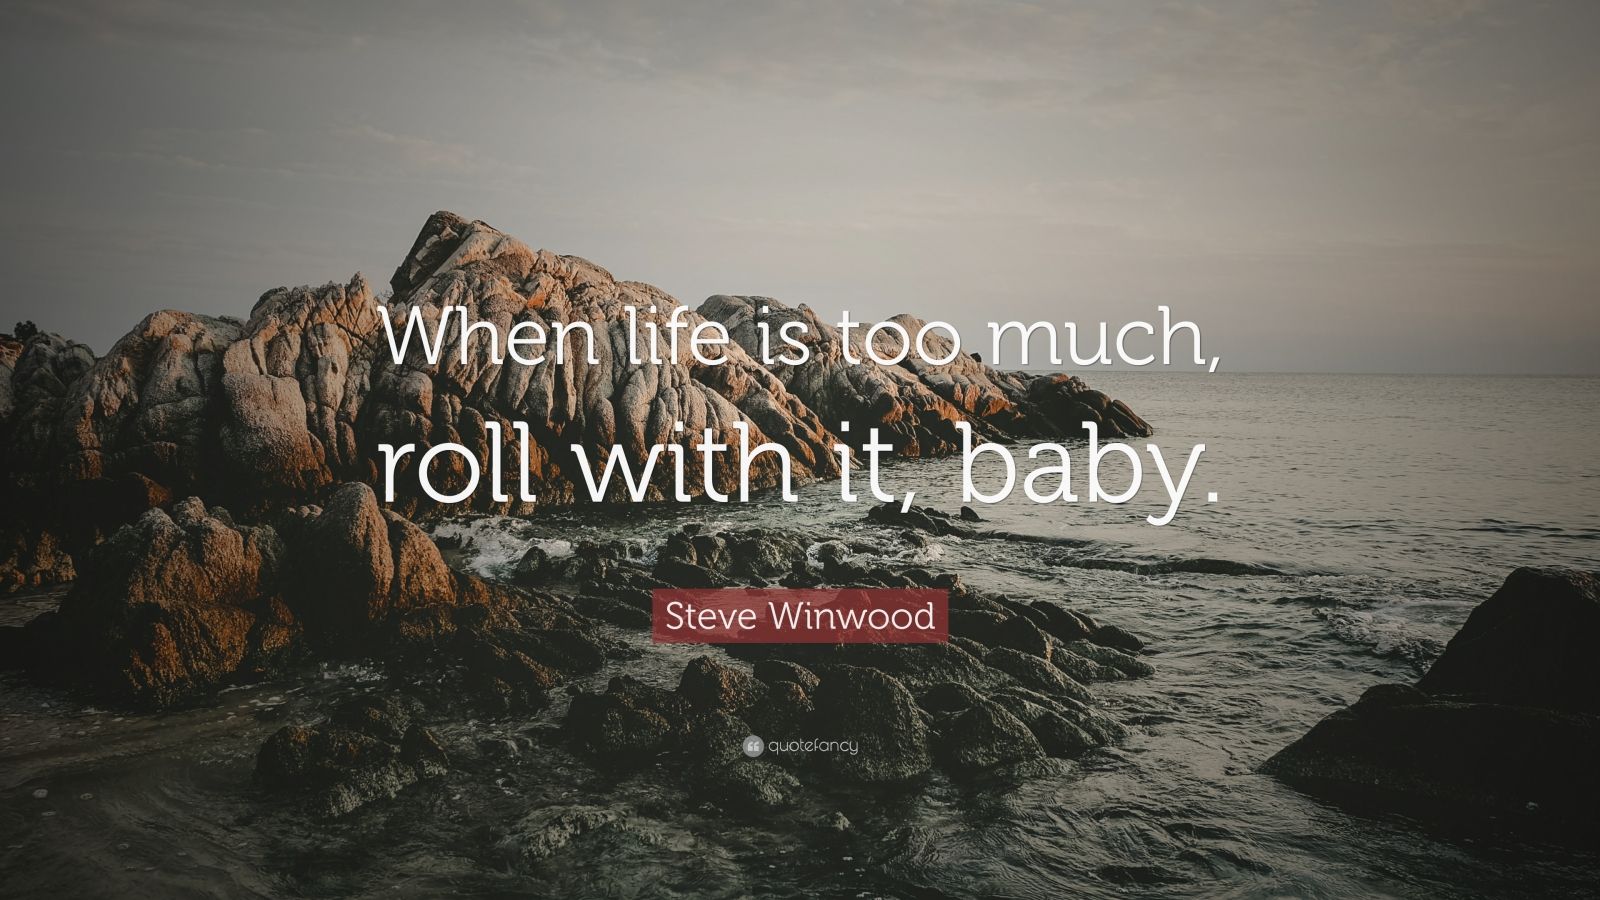 roll with it baby steve winwood boobs